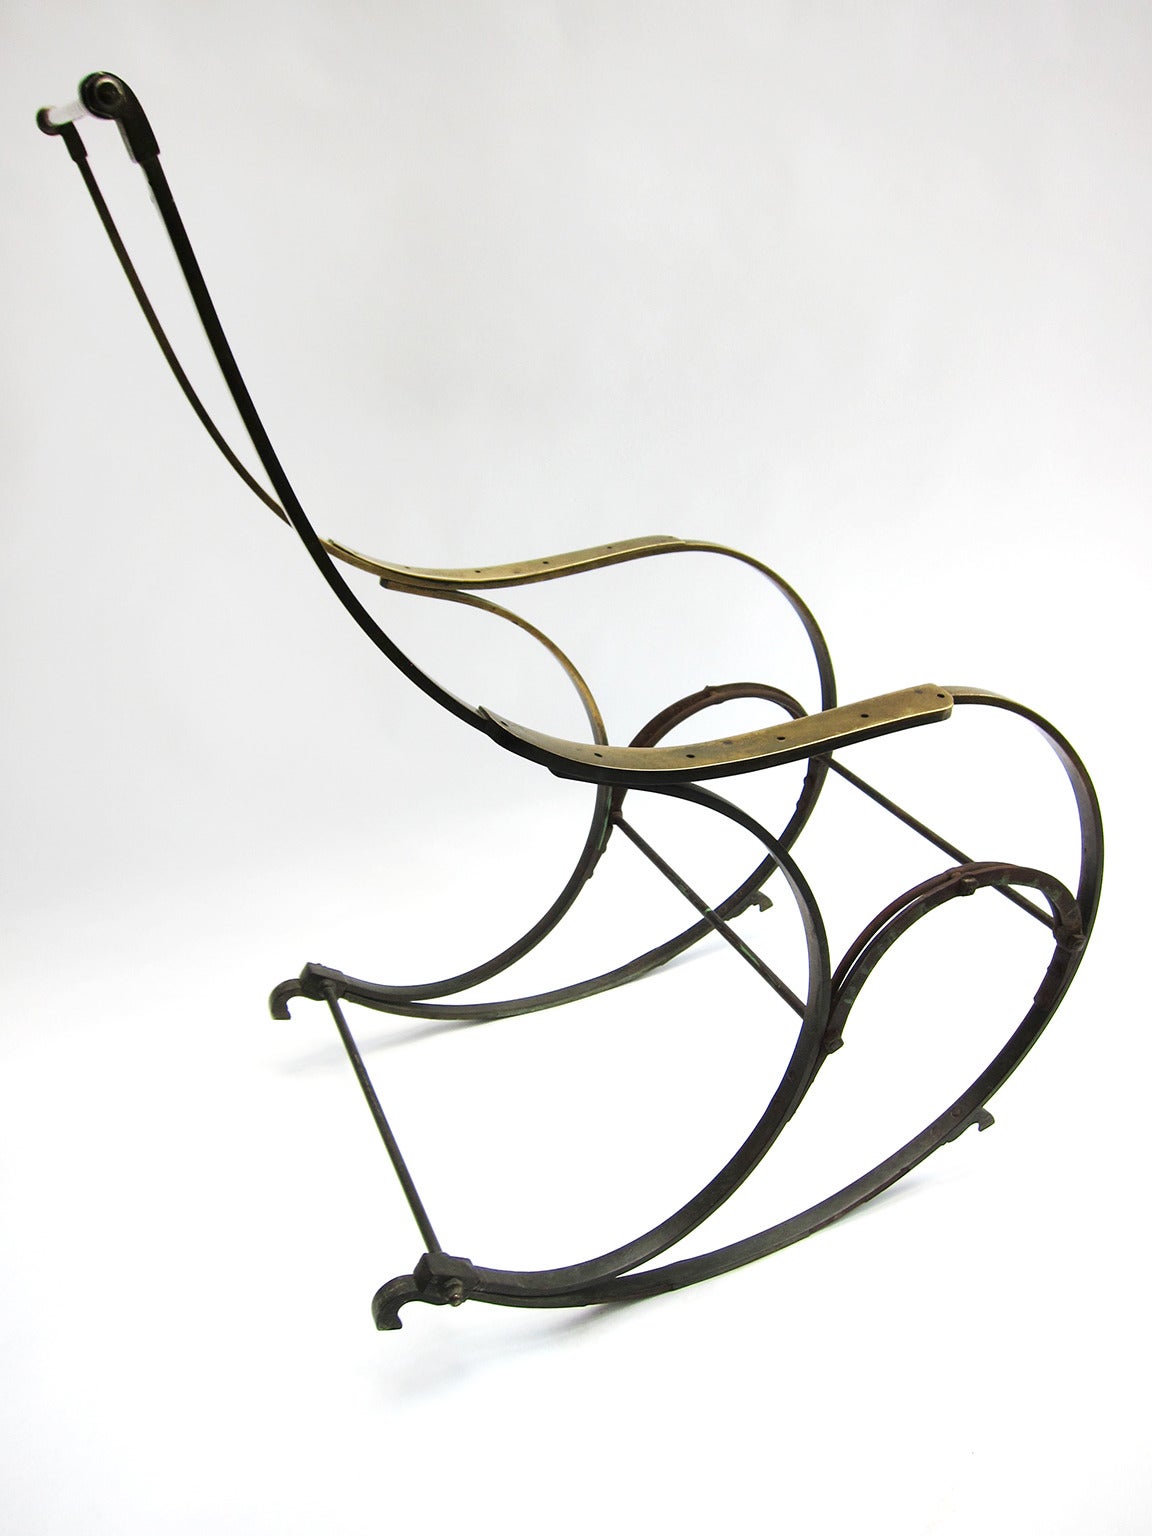 The innovation and mastery of this exceptionally sculptural rocking chair should be taken in the context of the era in which it was created. Featured by R.W. Winfield in the Great Exhibition of London in 1851, it was meant to demonstrate a